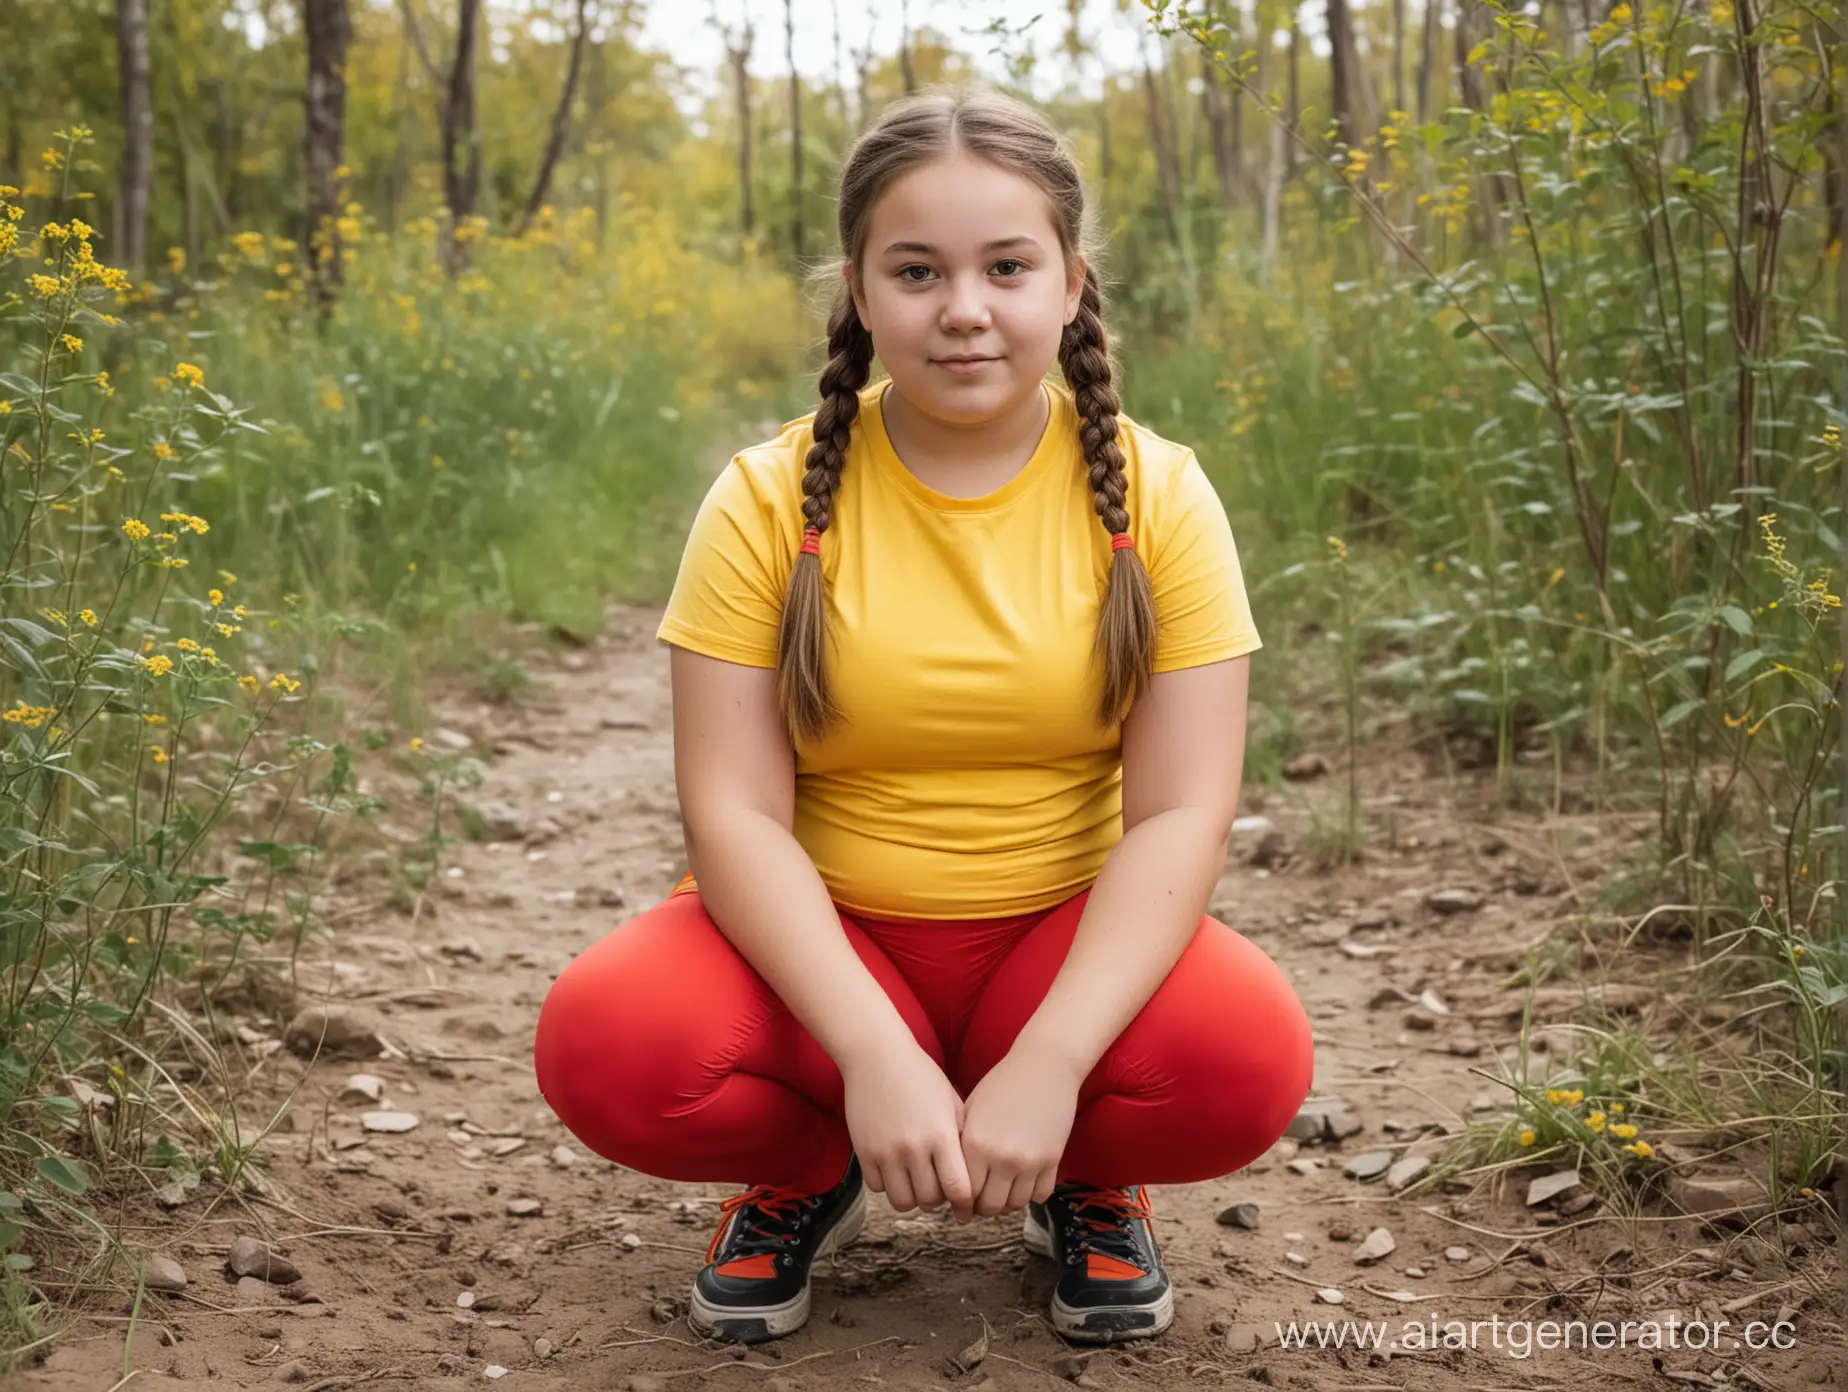 Adorable-12YearOld-Girl-with-Pigtails-in-Nature